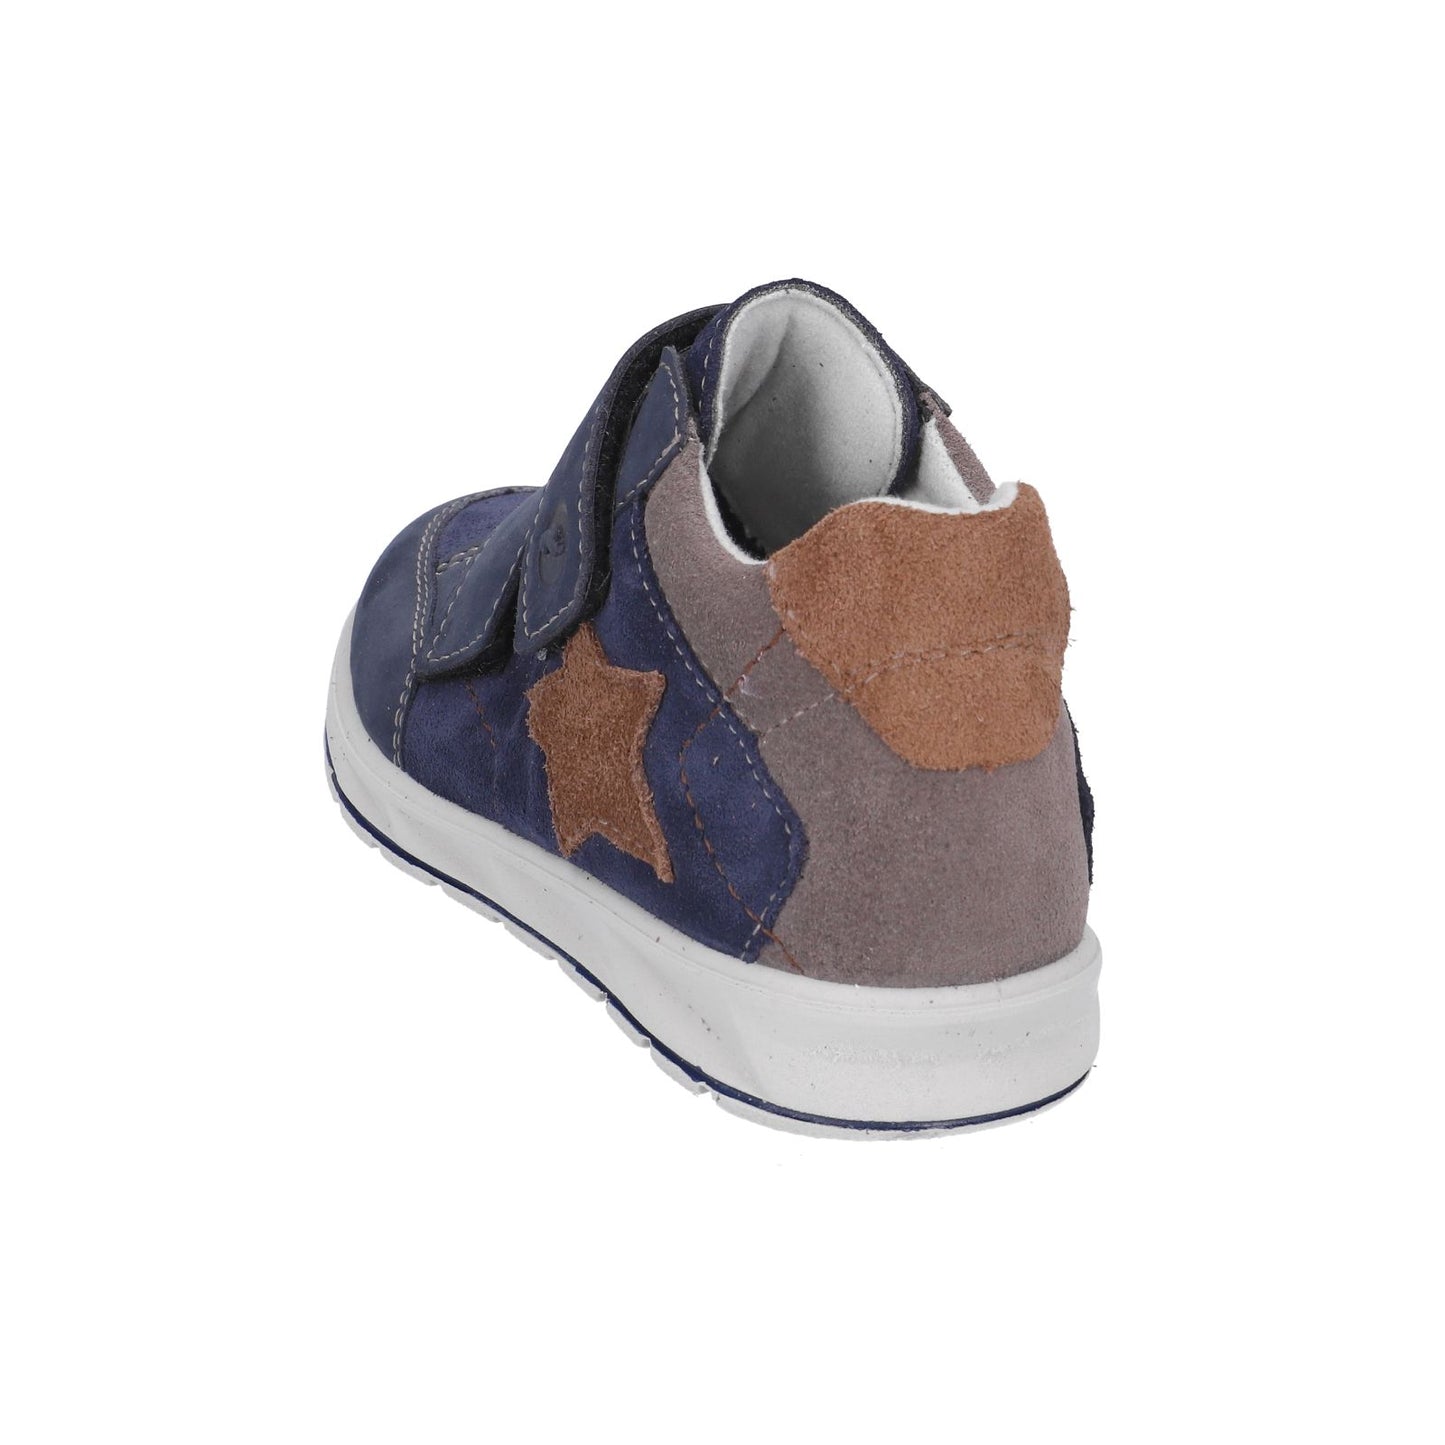 A boys waterproof ankle boot by Ricosta, style Kim, in navy ,tan and grey nubuck with double velcro fastening. Angled view.